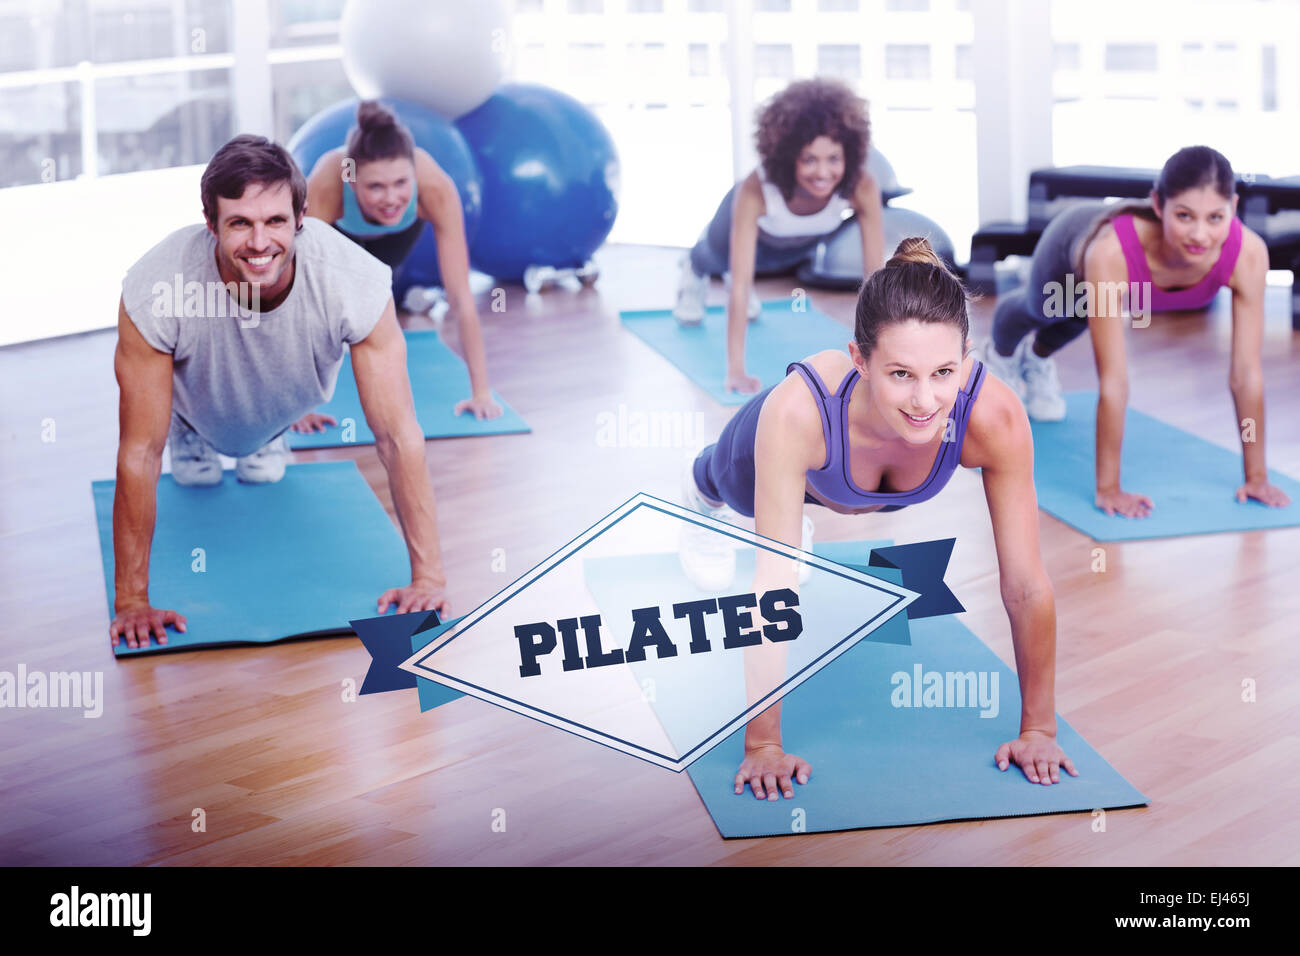 The word pilates and people doing push ups in fitness studio Stock Photo